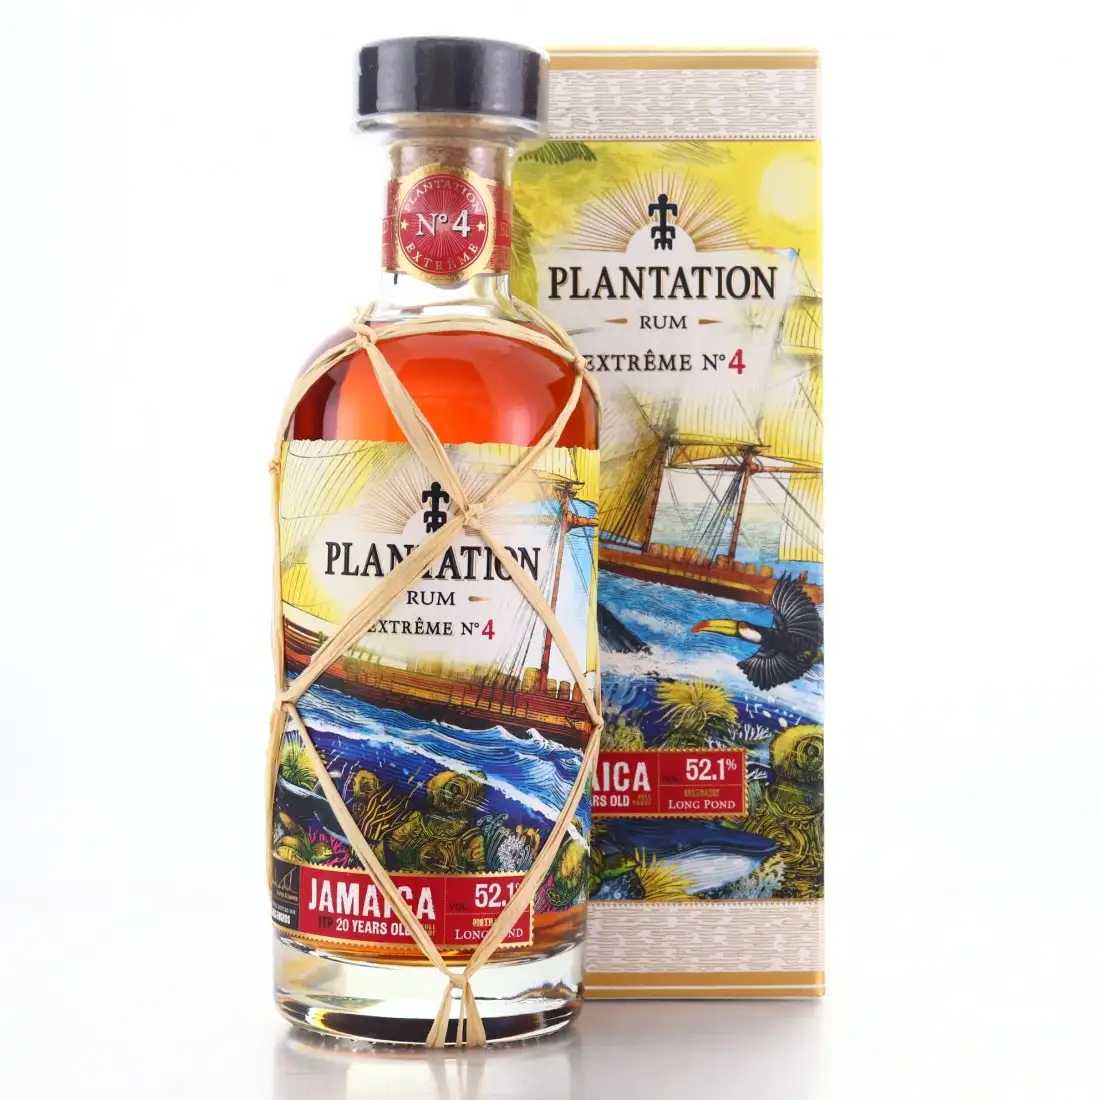 Image of the front of the bottle of the rum Plantation Extreme No. 4 ITP